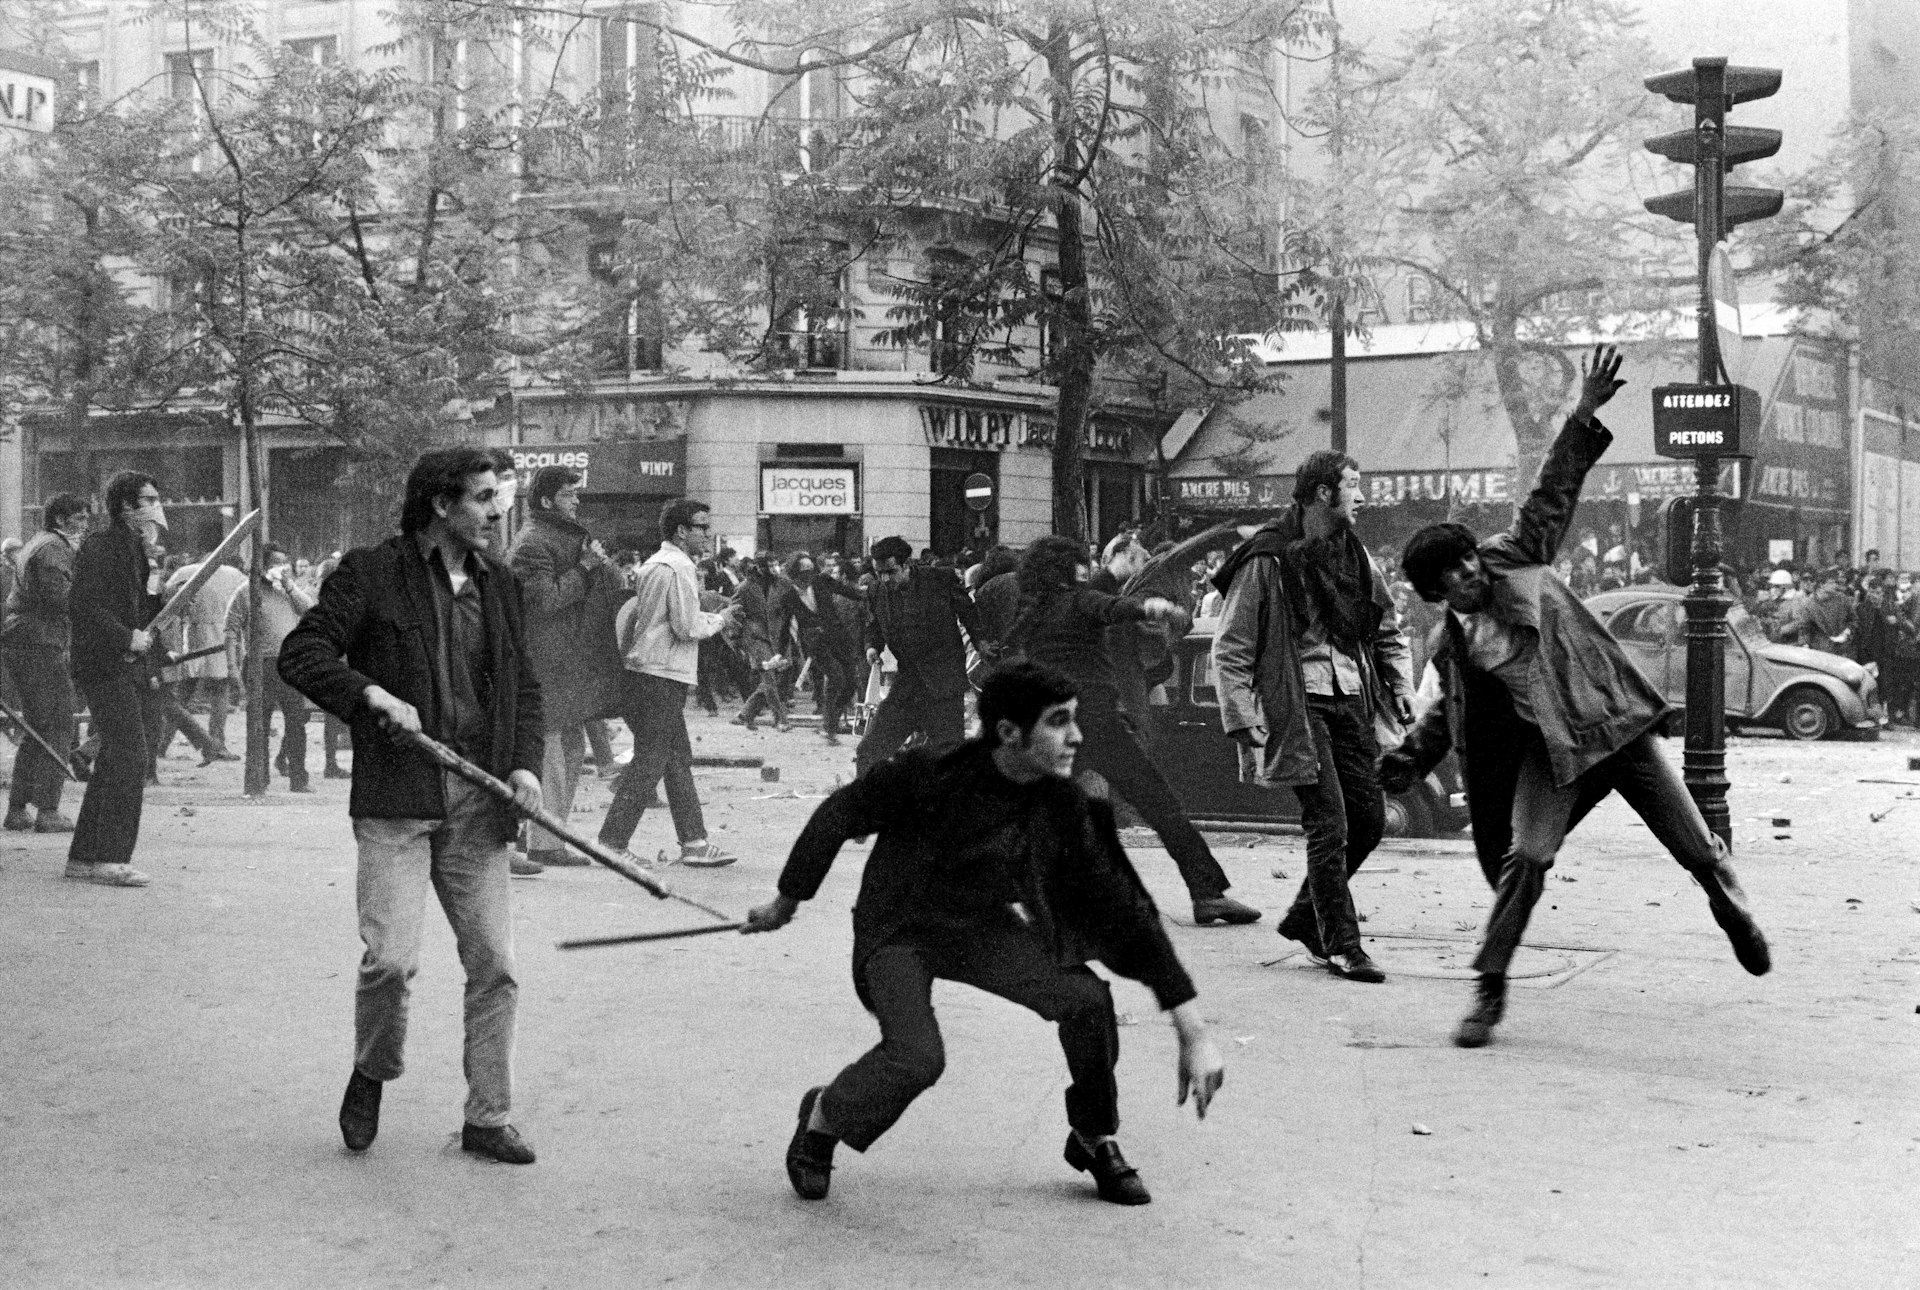 Students hurling objects at the police. Boulevard Saint-Germain, 6th arrondissement, Paris, France. May 6, 1968. © Bruno Barbey / Magnum Photos